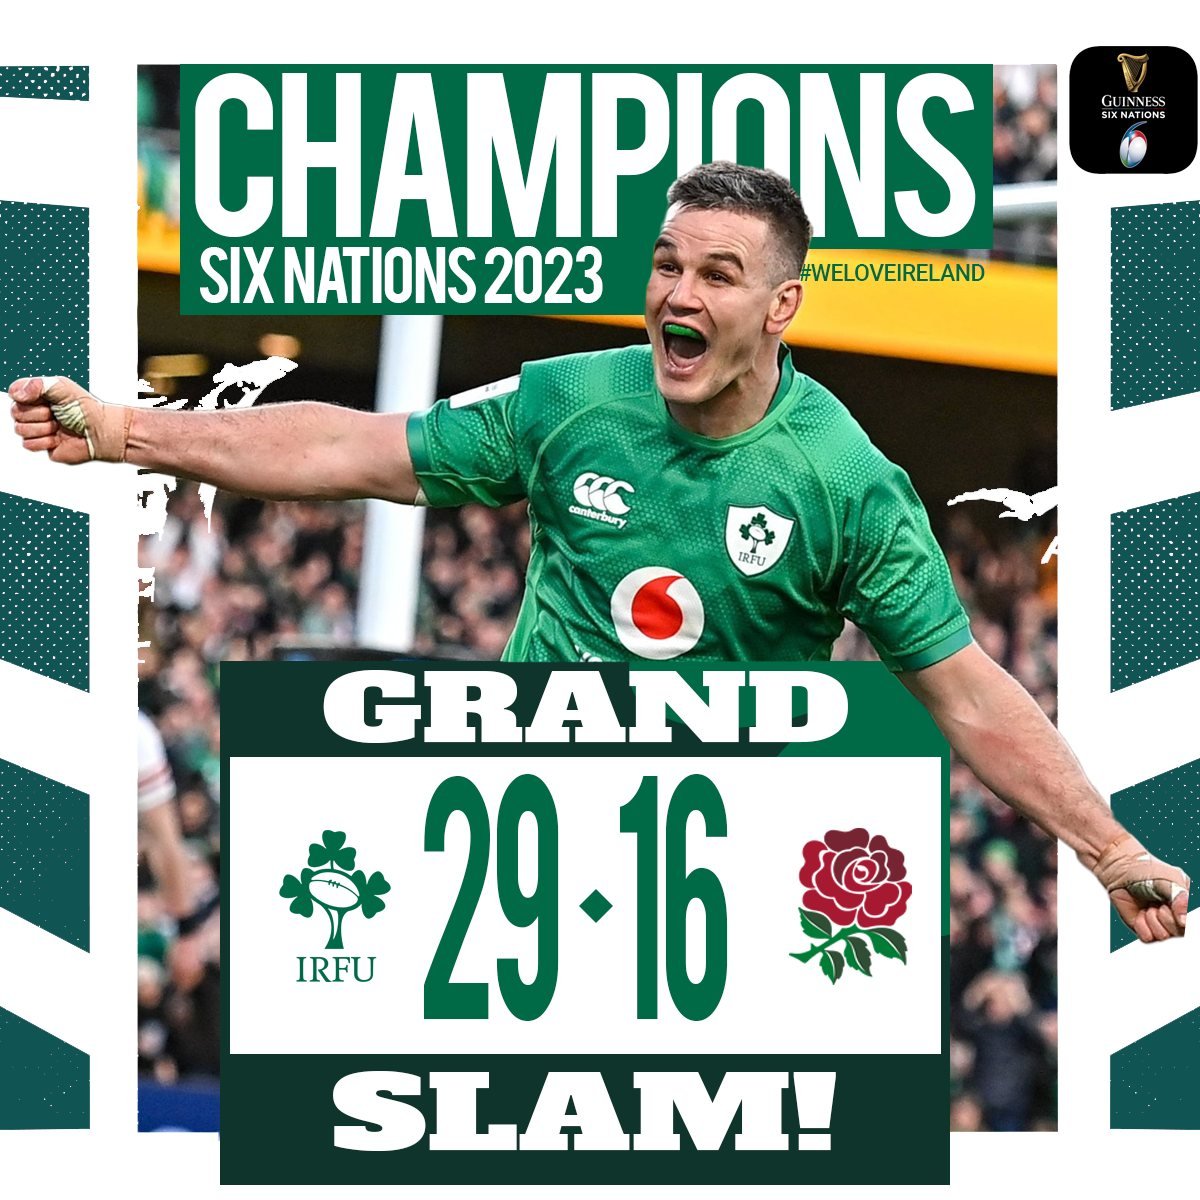 Grand Slam Winners! What a feeling!🎉🏆 Ireland have won the Grand Slam! What a superb Guinness 6 Nations campaign! 𝐅𝐔𝐋𝐋 𝐓𝐈𝐌𝐄: ☘️29 - 🏴󠁧󠁢󠁥󠁮󠁧󠁿16 Deservedly the best side in world rugby right now! 🙌